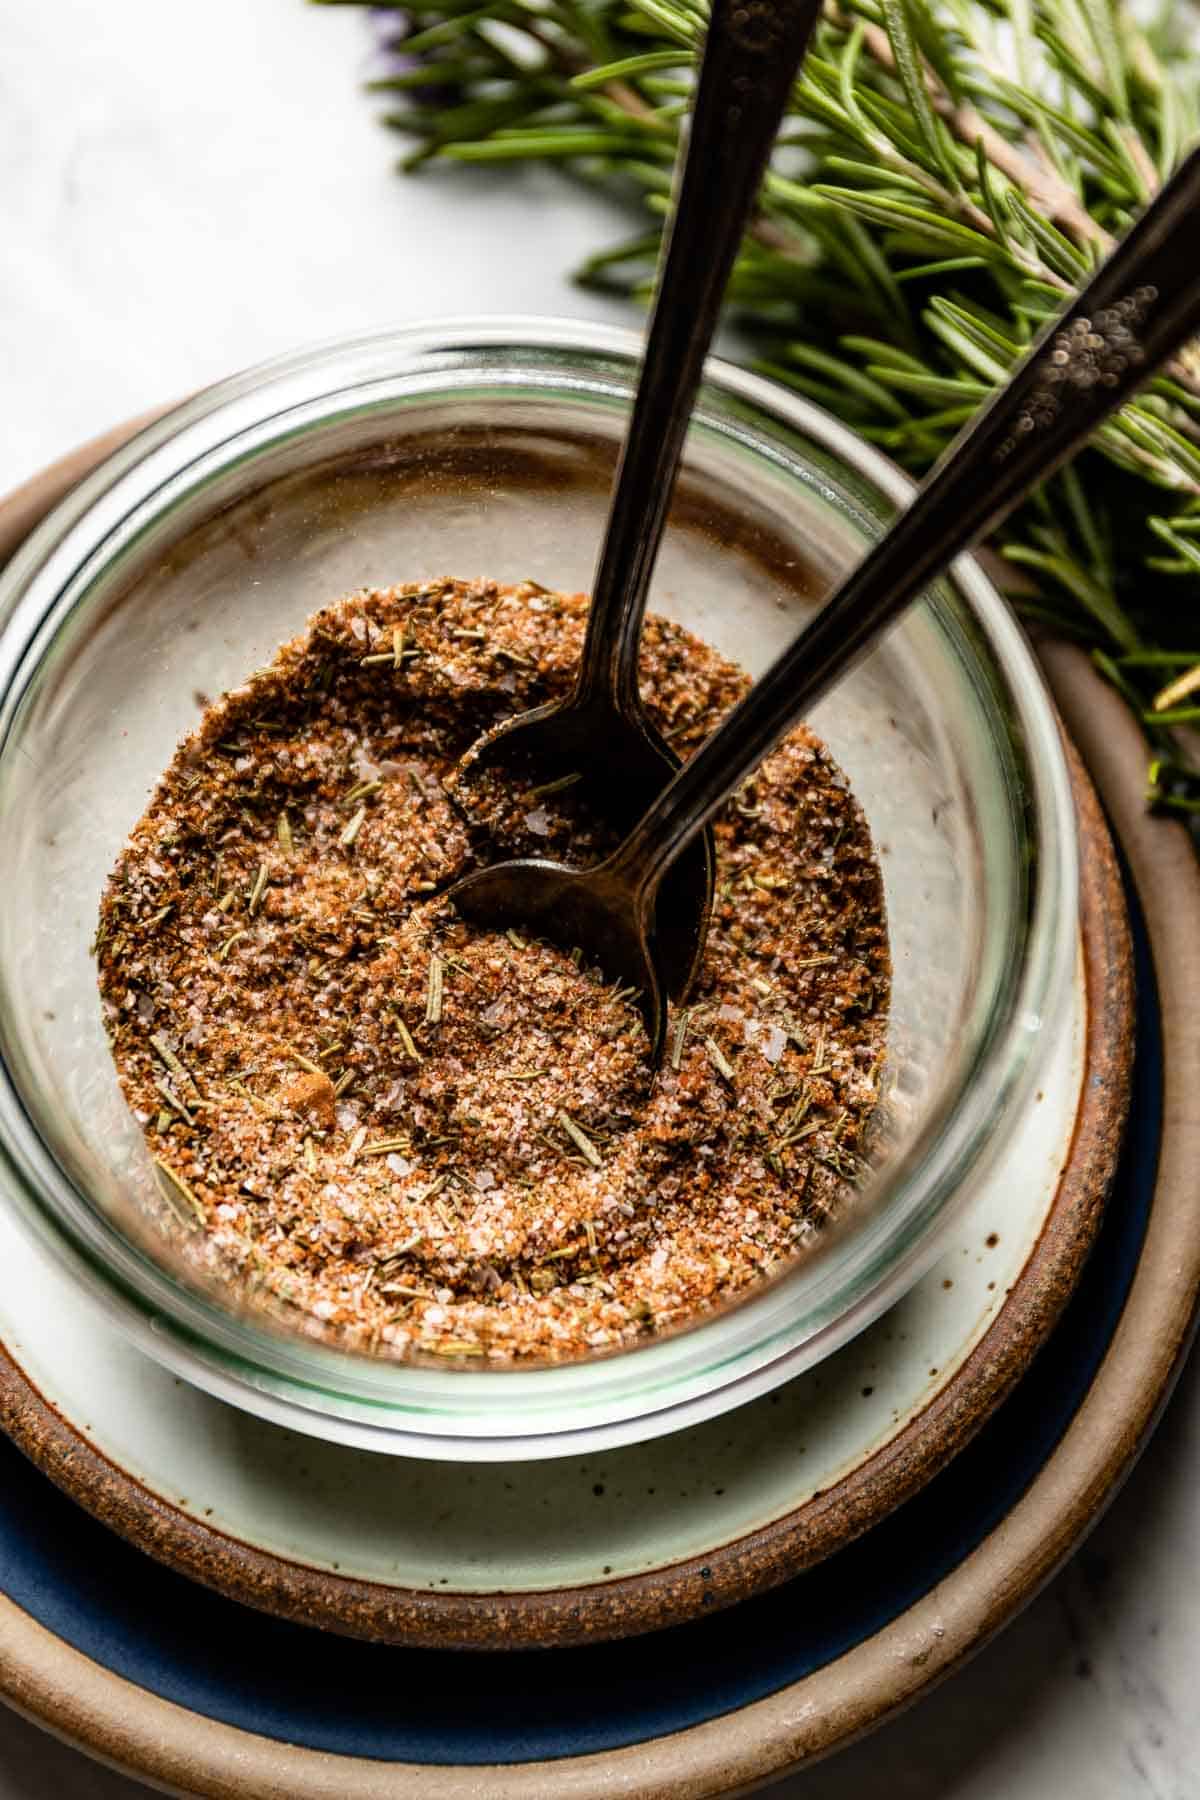 A blend of herbs and spices in a bowl with spoons from the top view.